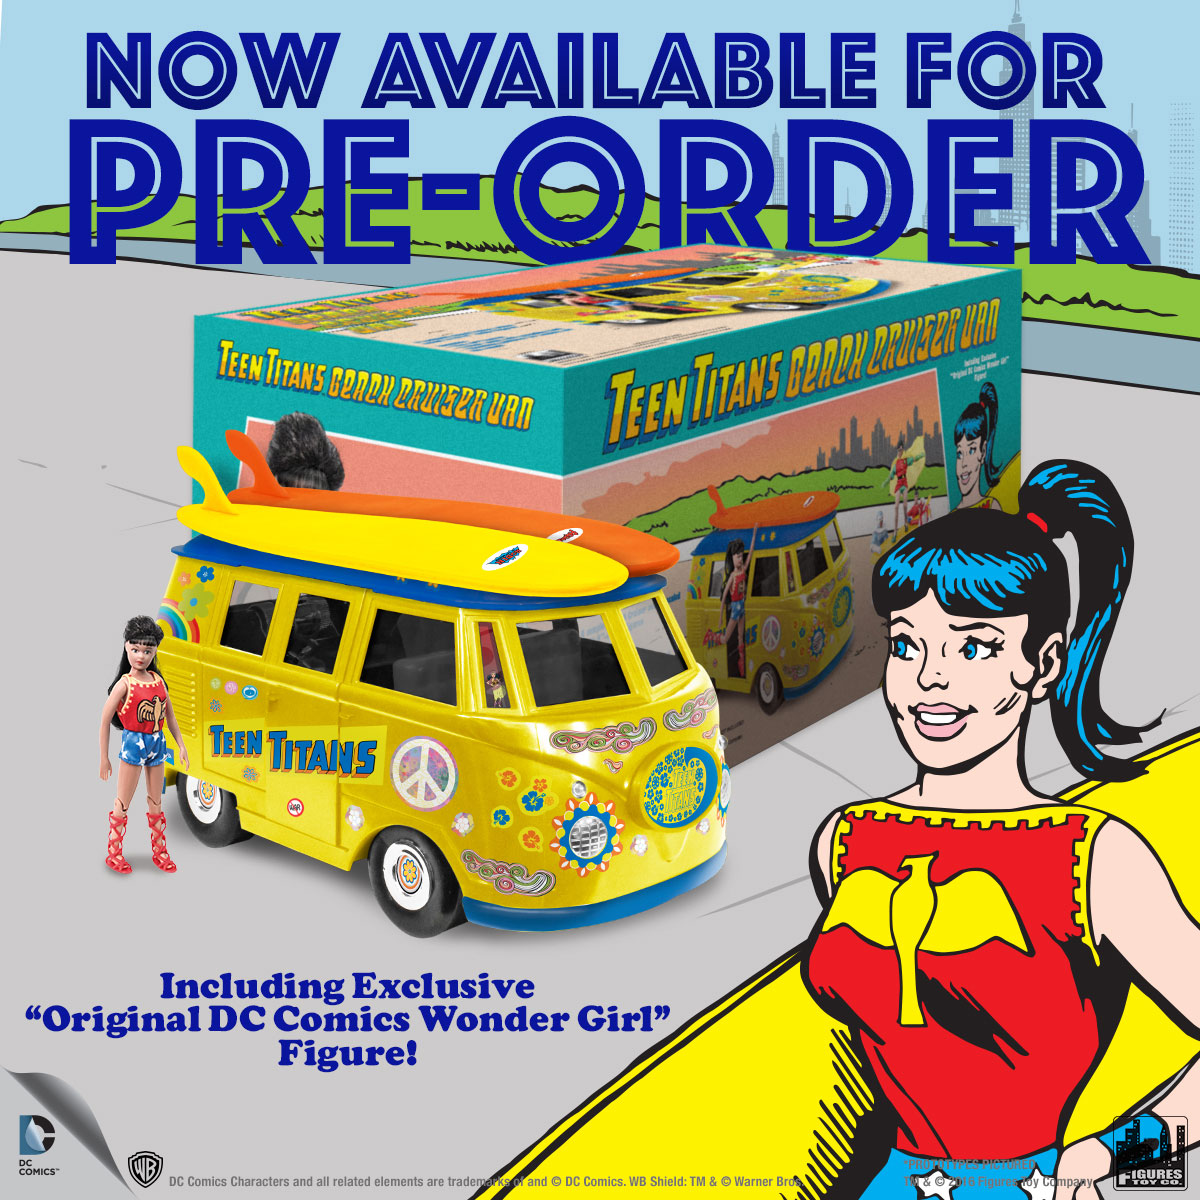 Official DC Comics Teen Titans Bus Playset With Exclusive Wondergirl Figure